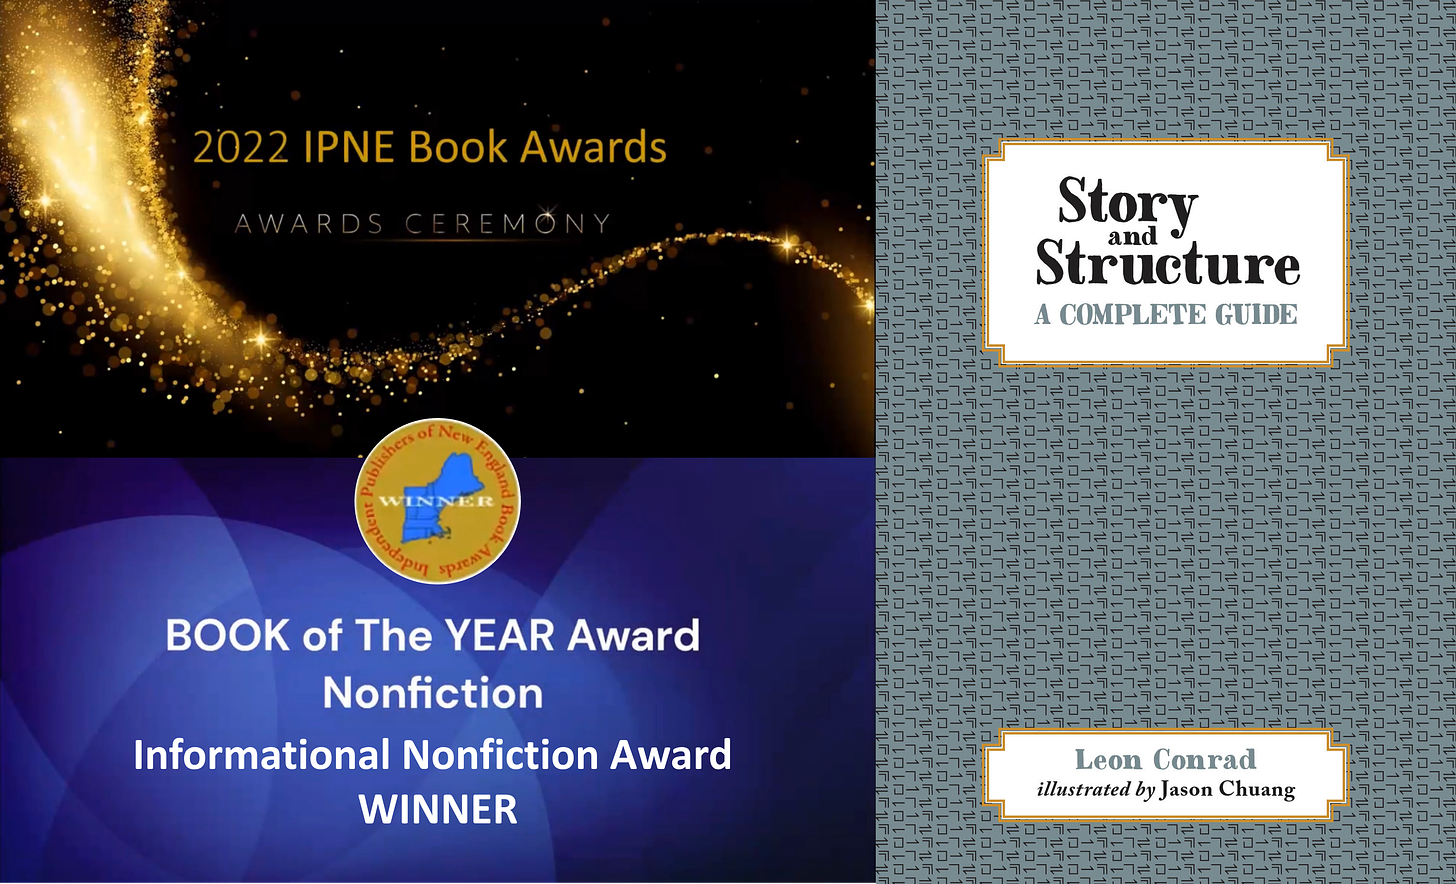 Story and Structure - IPNE Book of the Year Award 2022 winner - Informational Nonfiction Award winner - IPNE 2022